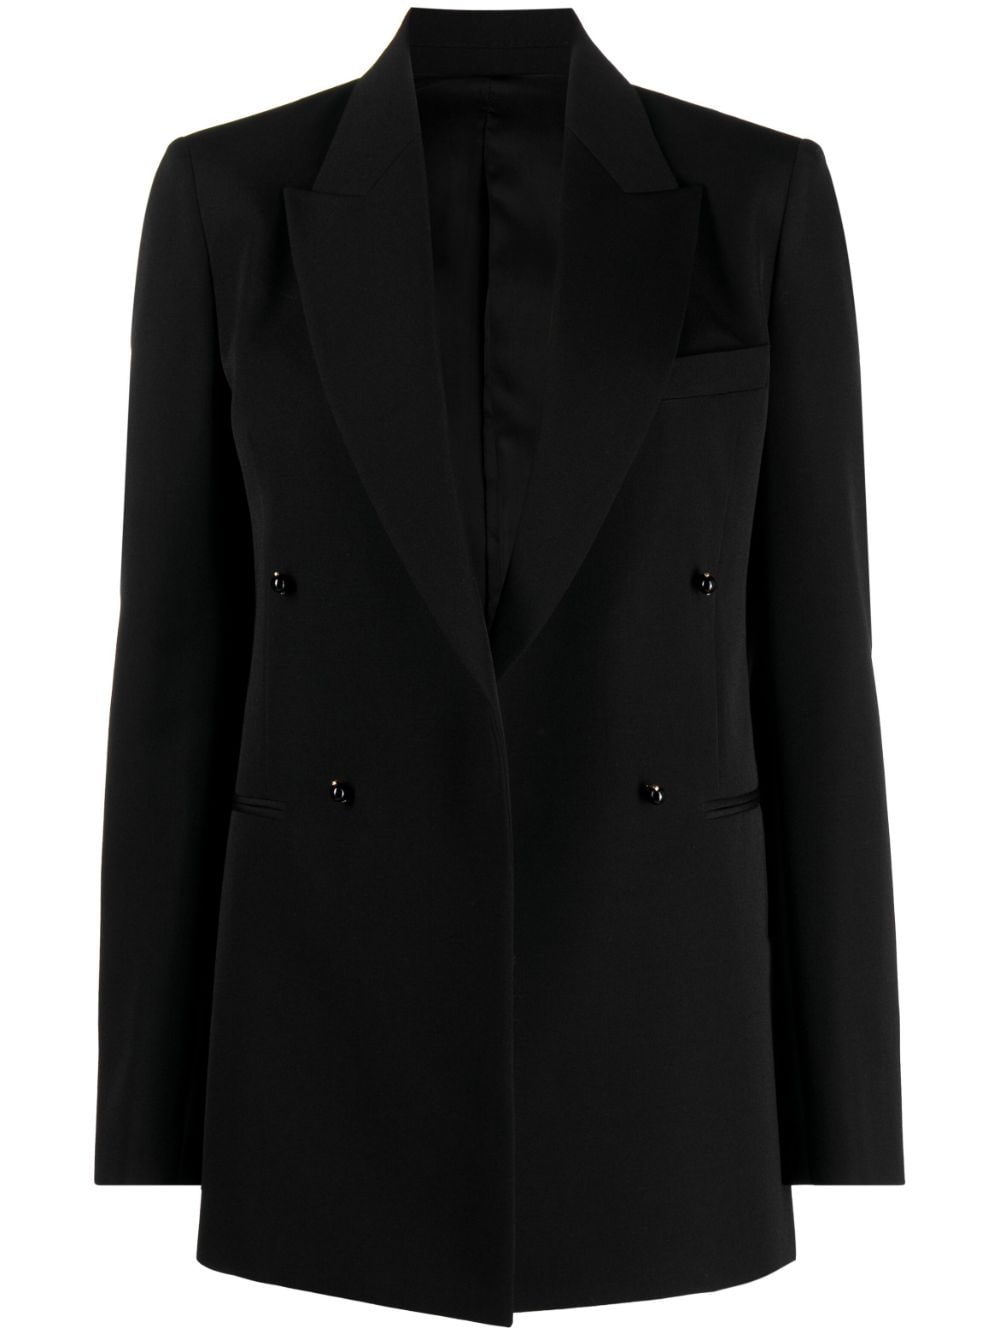 Lanvin double-breasted tailored jacket - Black